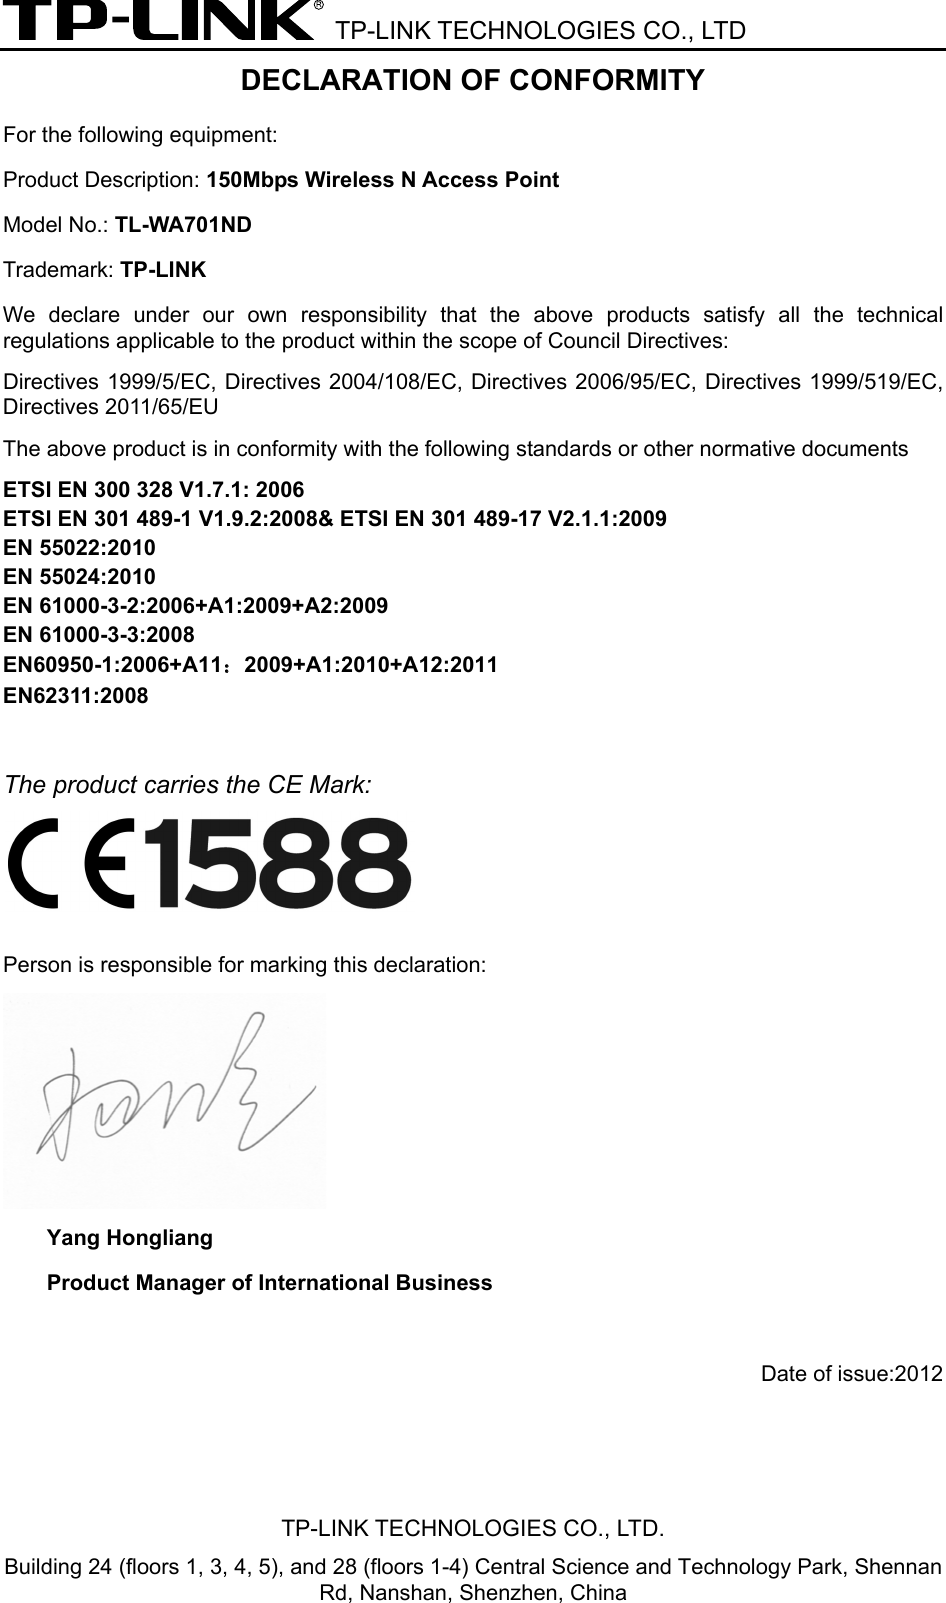  TP-LINK TECHNOLOGIES CO., LTD DECLARATION OF CONFORMITY For the following equipment: Product Description: 150Mbps Wireless N Access Point Model No.: TL-WA701ND Trademark: TP-LINK We  declare under our own responsibility  that  the  above  products  satisfy  all  the  technical regulations applicable to the product within the scope of Council Directives:     Directives 1999/5/EC,  Directives 2004/108/EC, Directives  2006/95/EC, Directives  1999/519/EC, Directives 2011/65/EU The above product is in conformity with the following standards or other normative documents ETSI EN 300 328 V1.7.1: 2006 ETSI EN 301 489-1 V1.9.2:2008&amp; ETSI EN 301 489-17 V2.1.1:2009 EN 55022:2010 EN 55024:2010 EN 61000-3-2:2006+A1:2009+A2:2009 EN 61000-3-3:2008 EN60950-1:2006+A11：2009+A1:2010+A12:2011 EN62311:2008  The product carries the CE Mark:   Person is responsible for marking this declaration:  Yang Hongliang Product Manager of International Business    Date of issue:2012 TP-LINK TECHNOLOGIES CO., LTD. Building 24 (floors 1, 3, 4, 5), and 28 (floors 1-4) Central Science and Technology Park, Shennan Rd, Nanshan, Shenzhen, China 